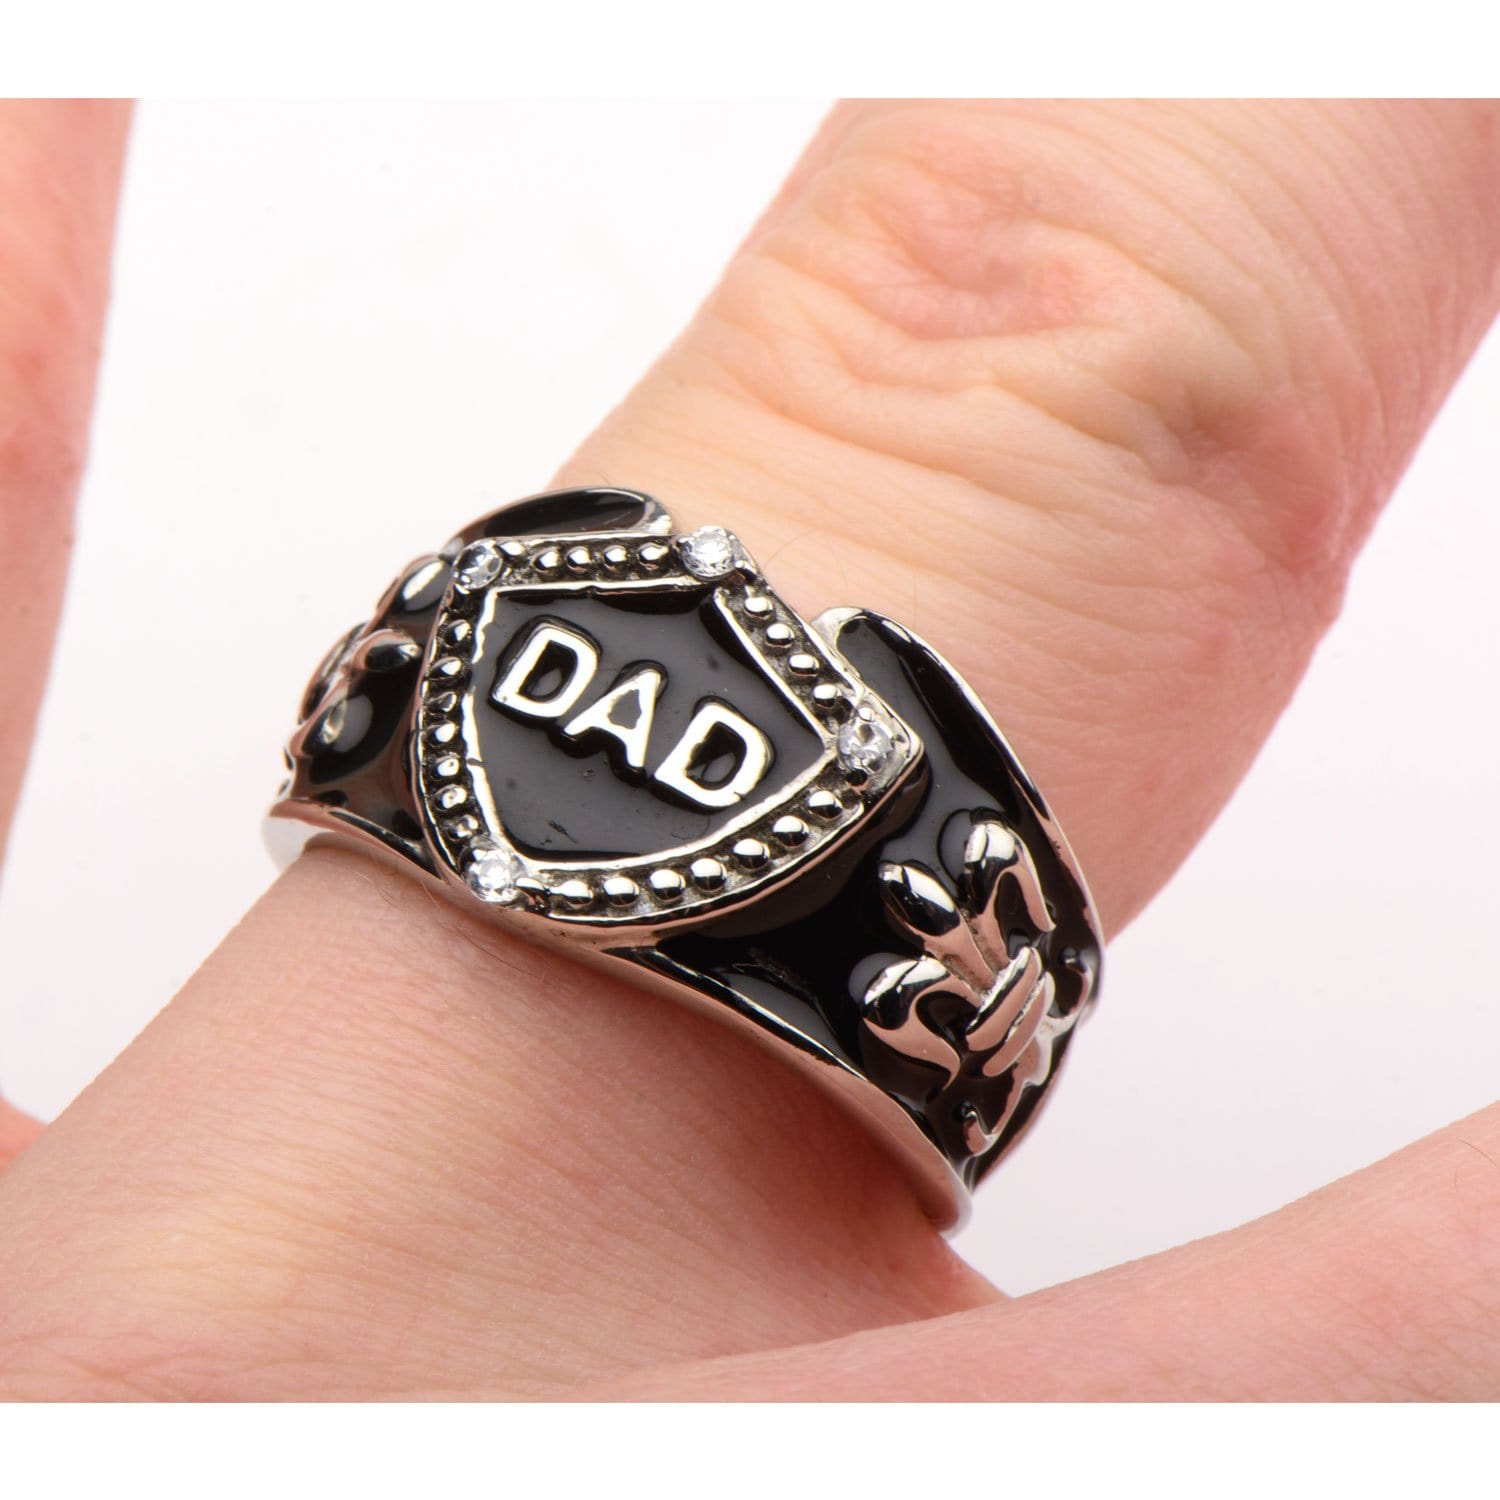 INOX JEWELRY Rings Black and Silver Tone Stainless Steel DAD Ring with Fleur Di Lis Accents